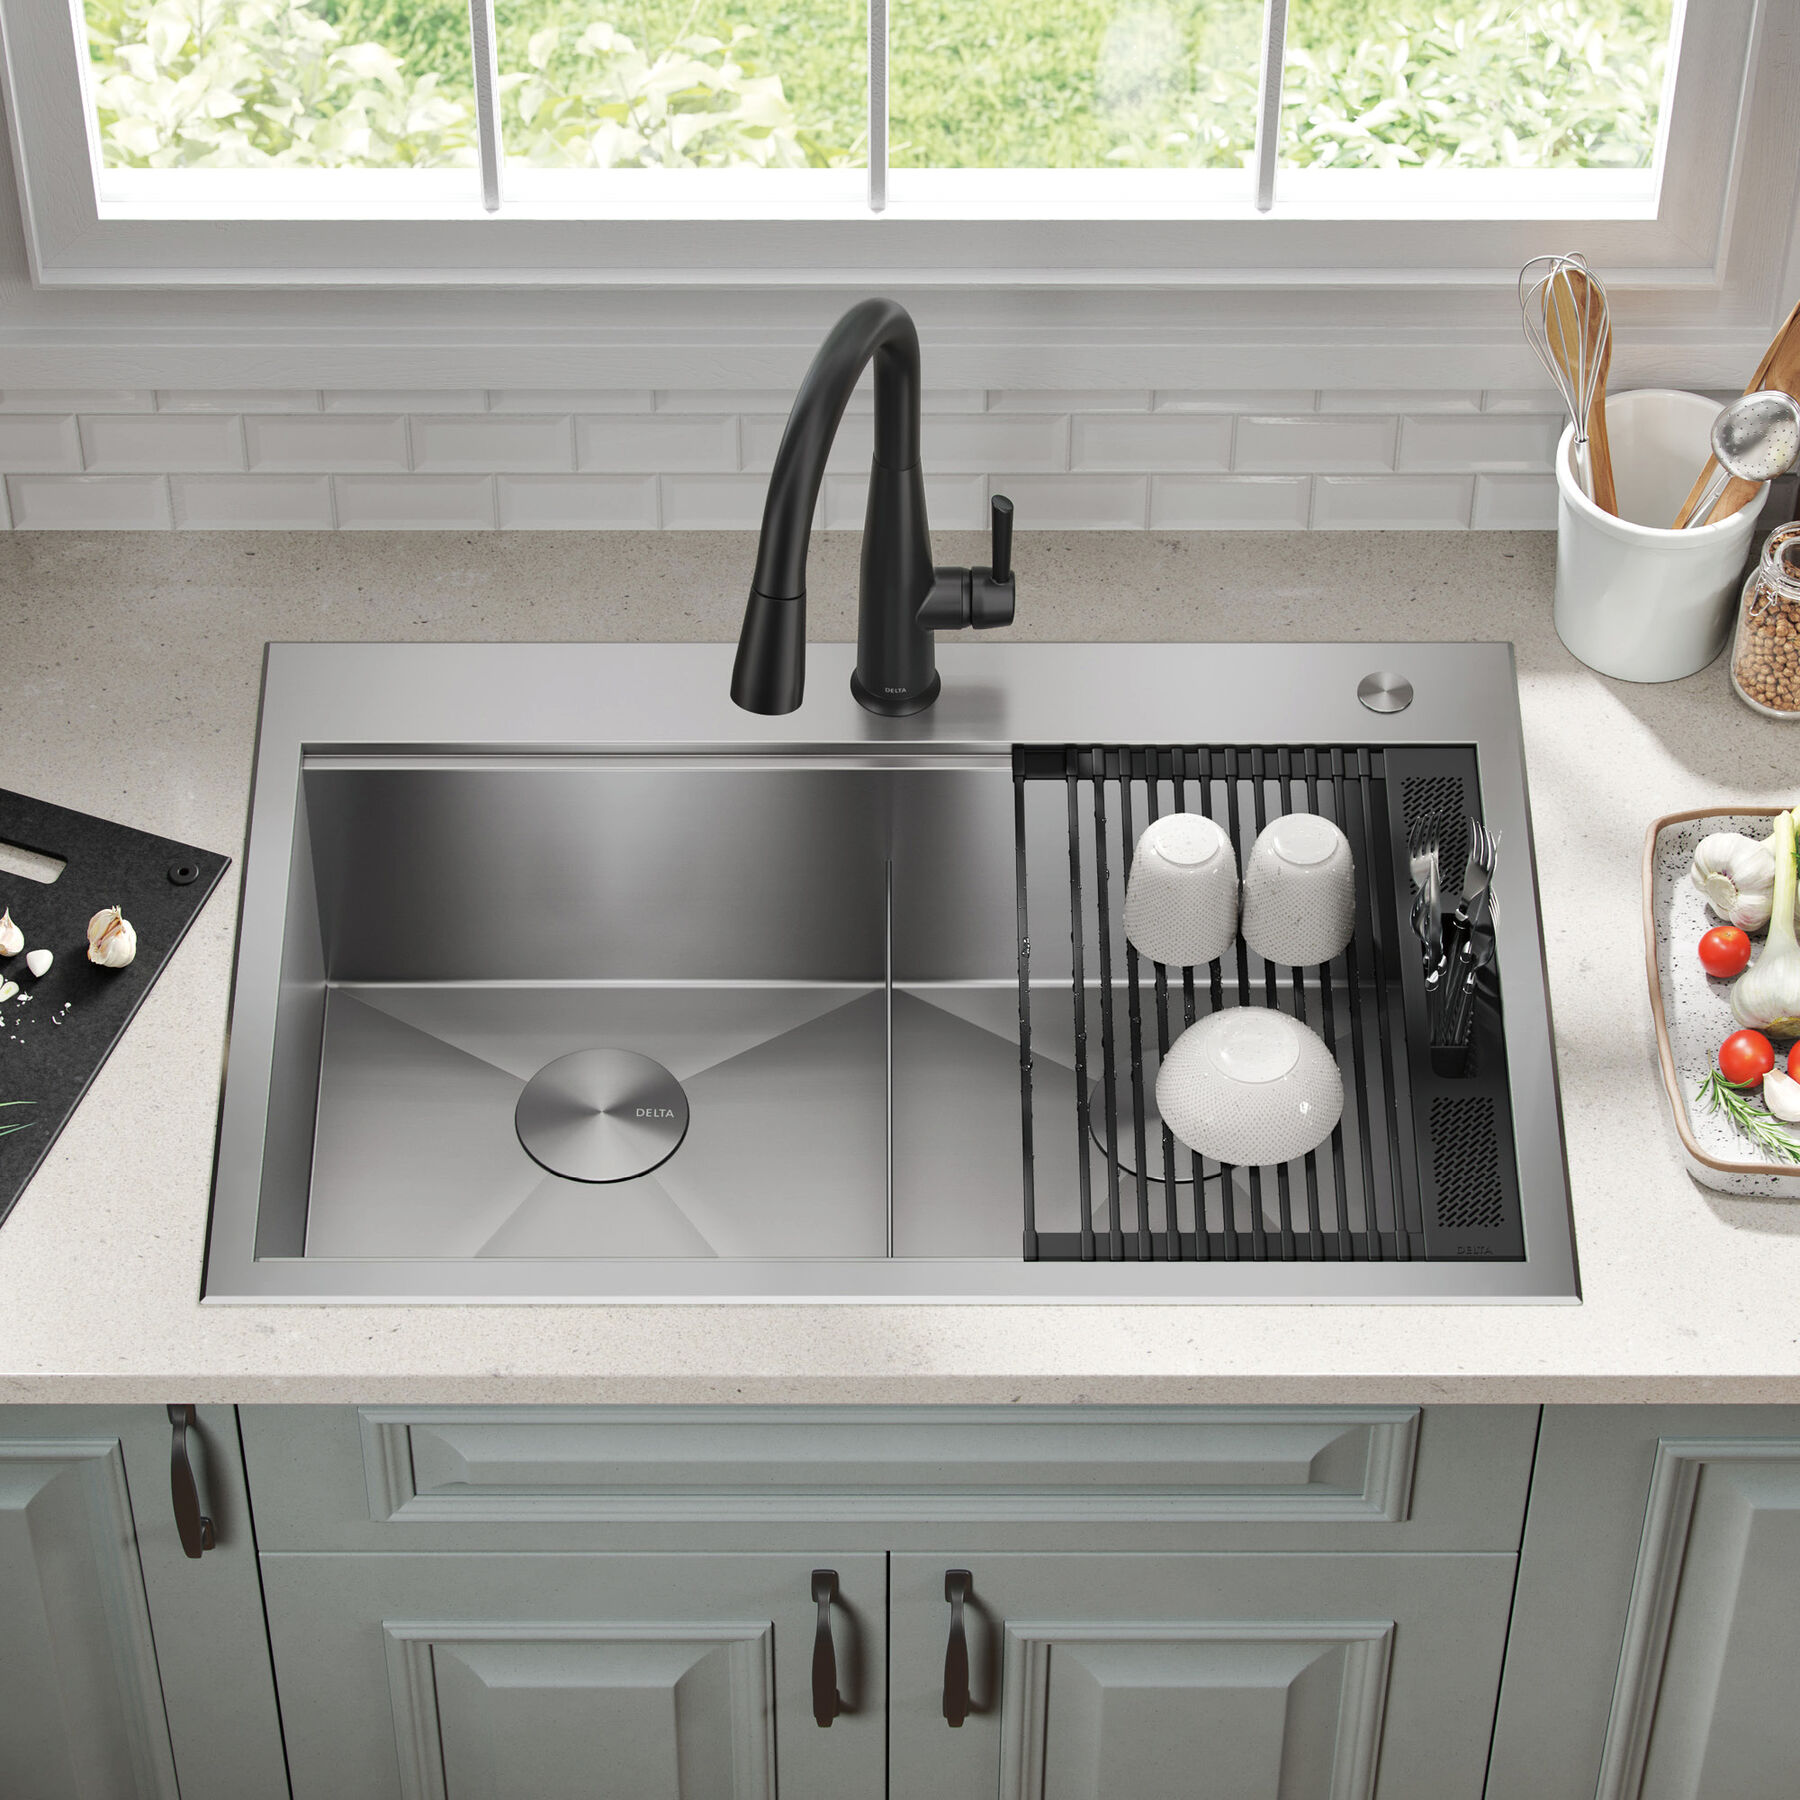 Double Bowl Sink Unit - Stainless Steel Sink Units - Kitchen Units